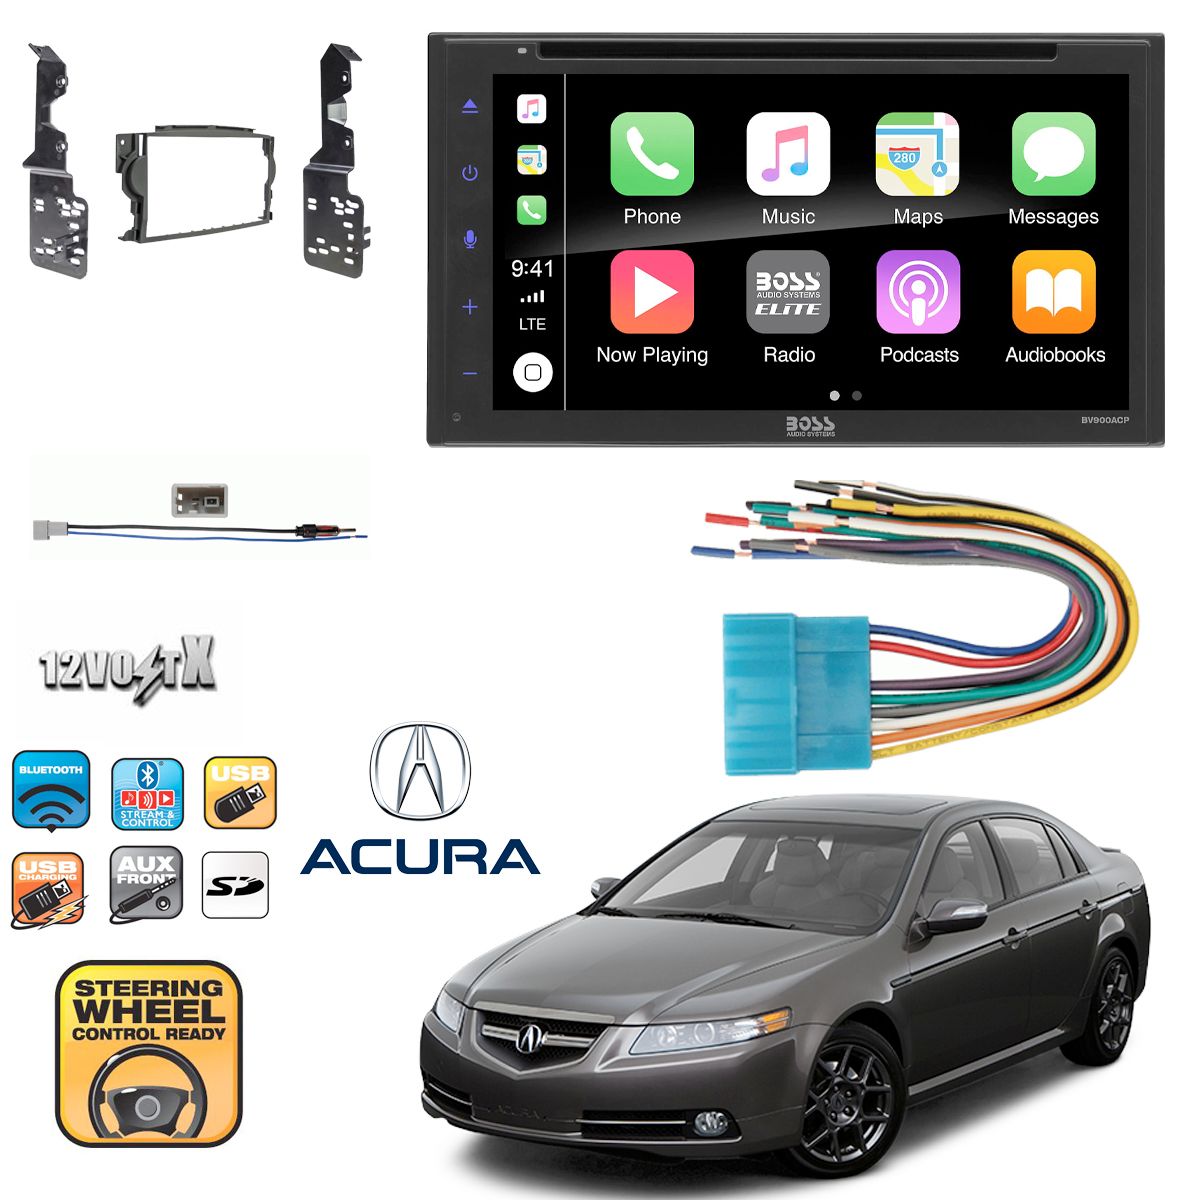 6.75" Multimeda Cd/Dvd Receiver CarPlay, Android Auto, For 2007-2008 Acura TL 